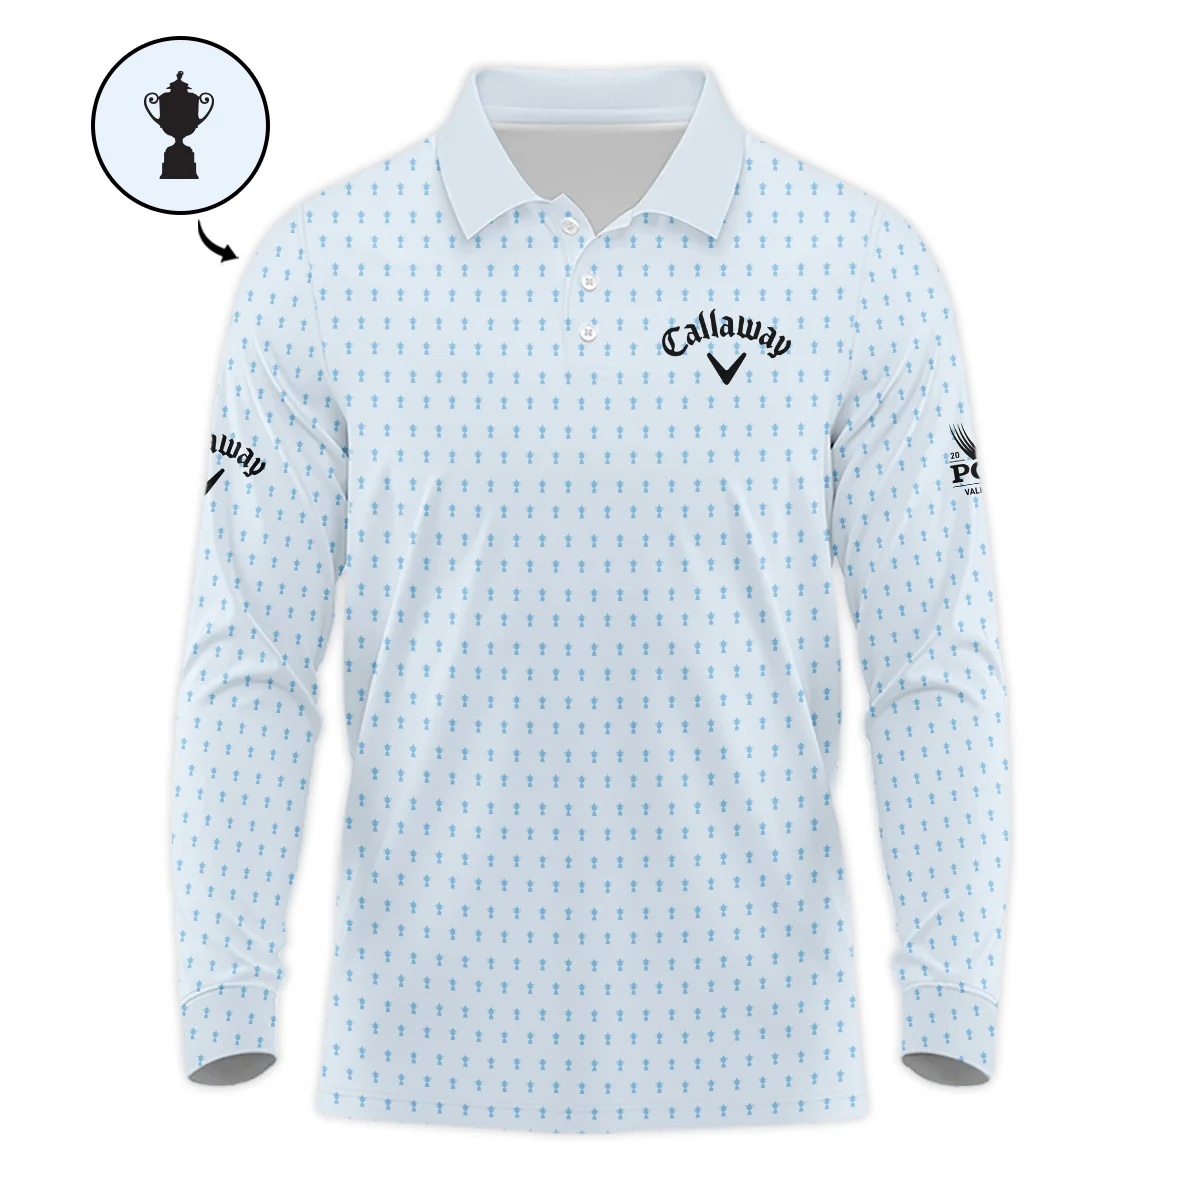 PGA Championship Valhalla Sports Callaway Polo Shirt Cup Pattern Light Blue Pastel All Over Print Polo Shirt For Men